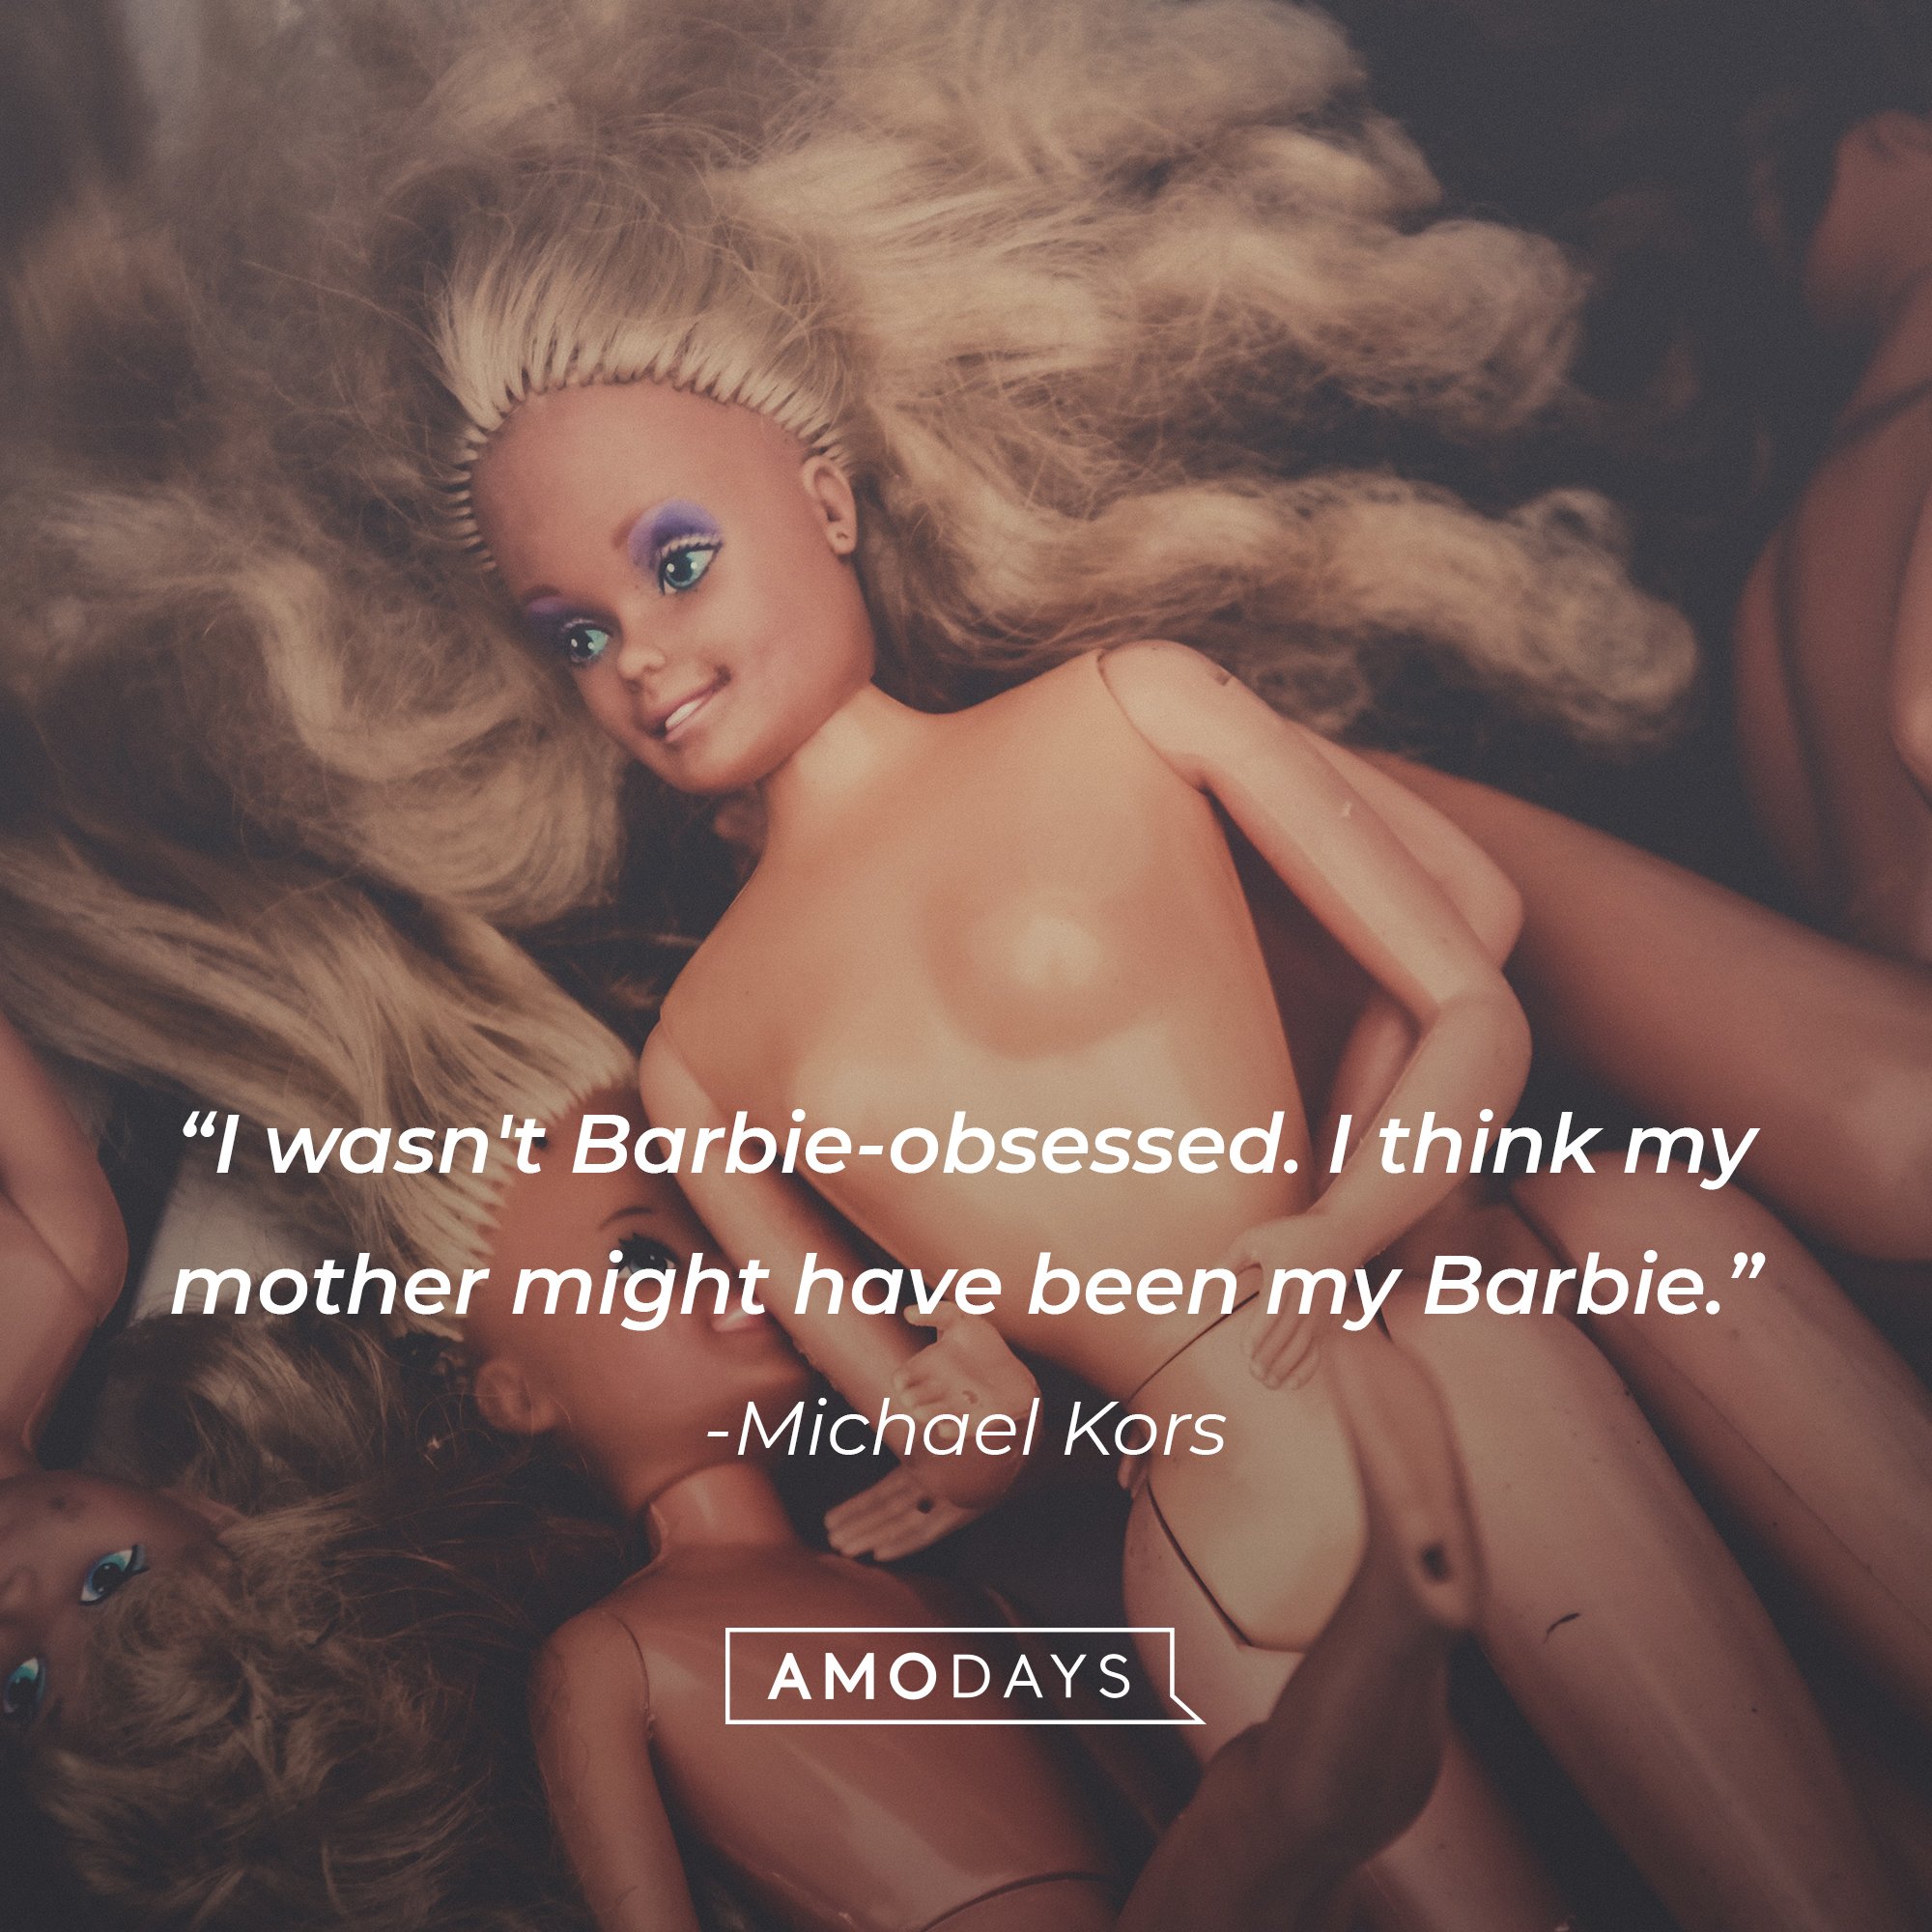 Michael Kors' quote: "I wasn't Barbie-obsessed. I think my mother might have been my Barbie." | Image: AmoDays